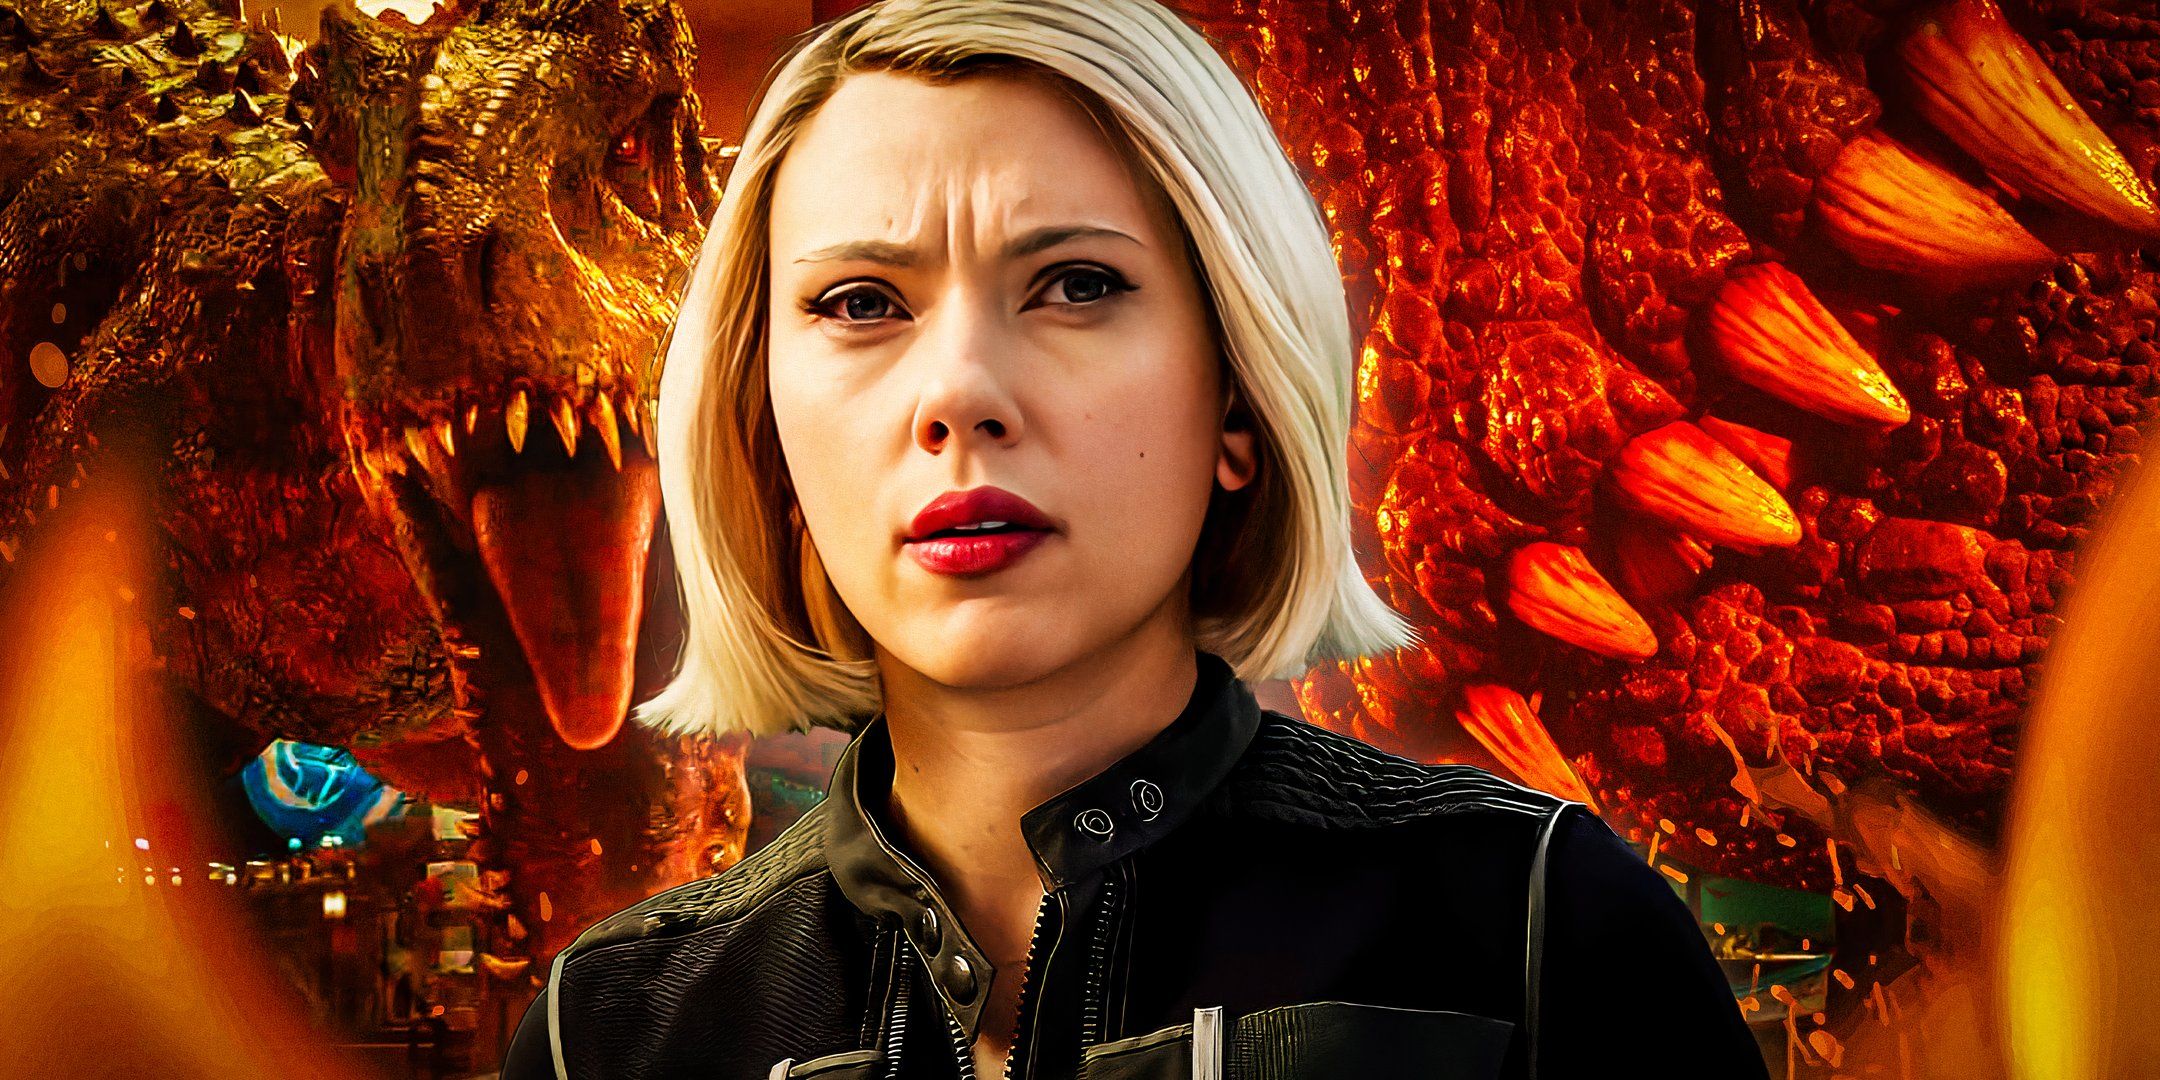 I would love to see Jurassic World 4 implement Scarlett Johansson’s shocking franchise role idea